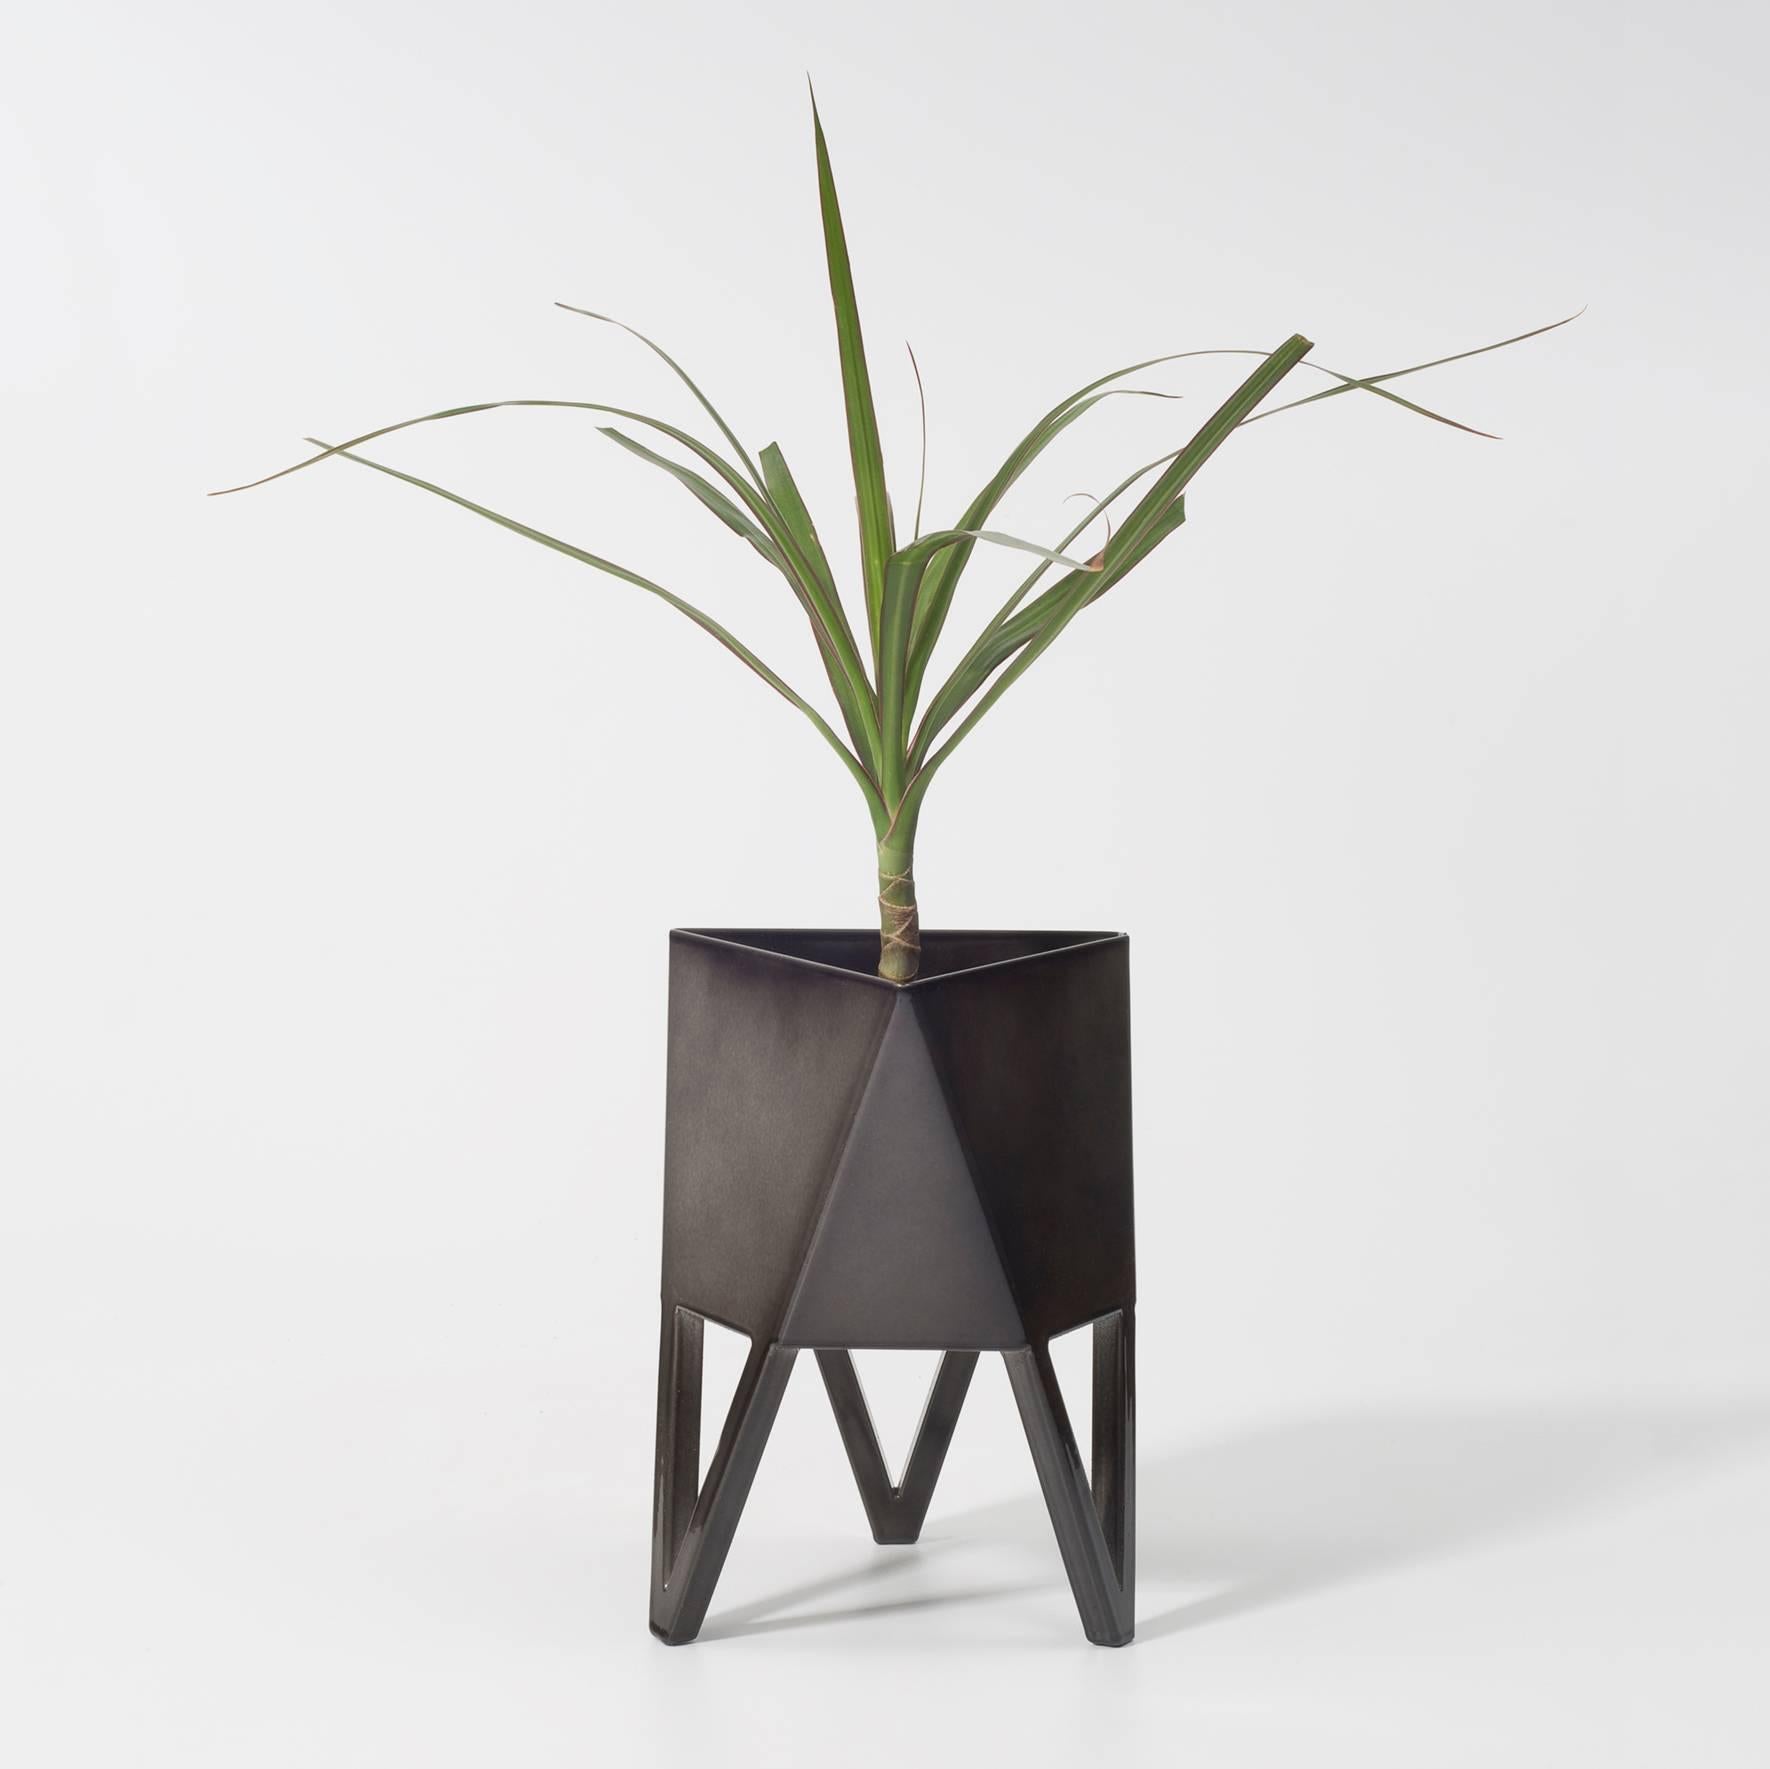 Contemporary Deca Planter in Glossy White Steel, Mini, by Force/Collide